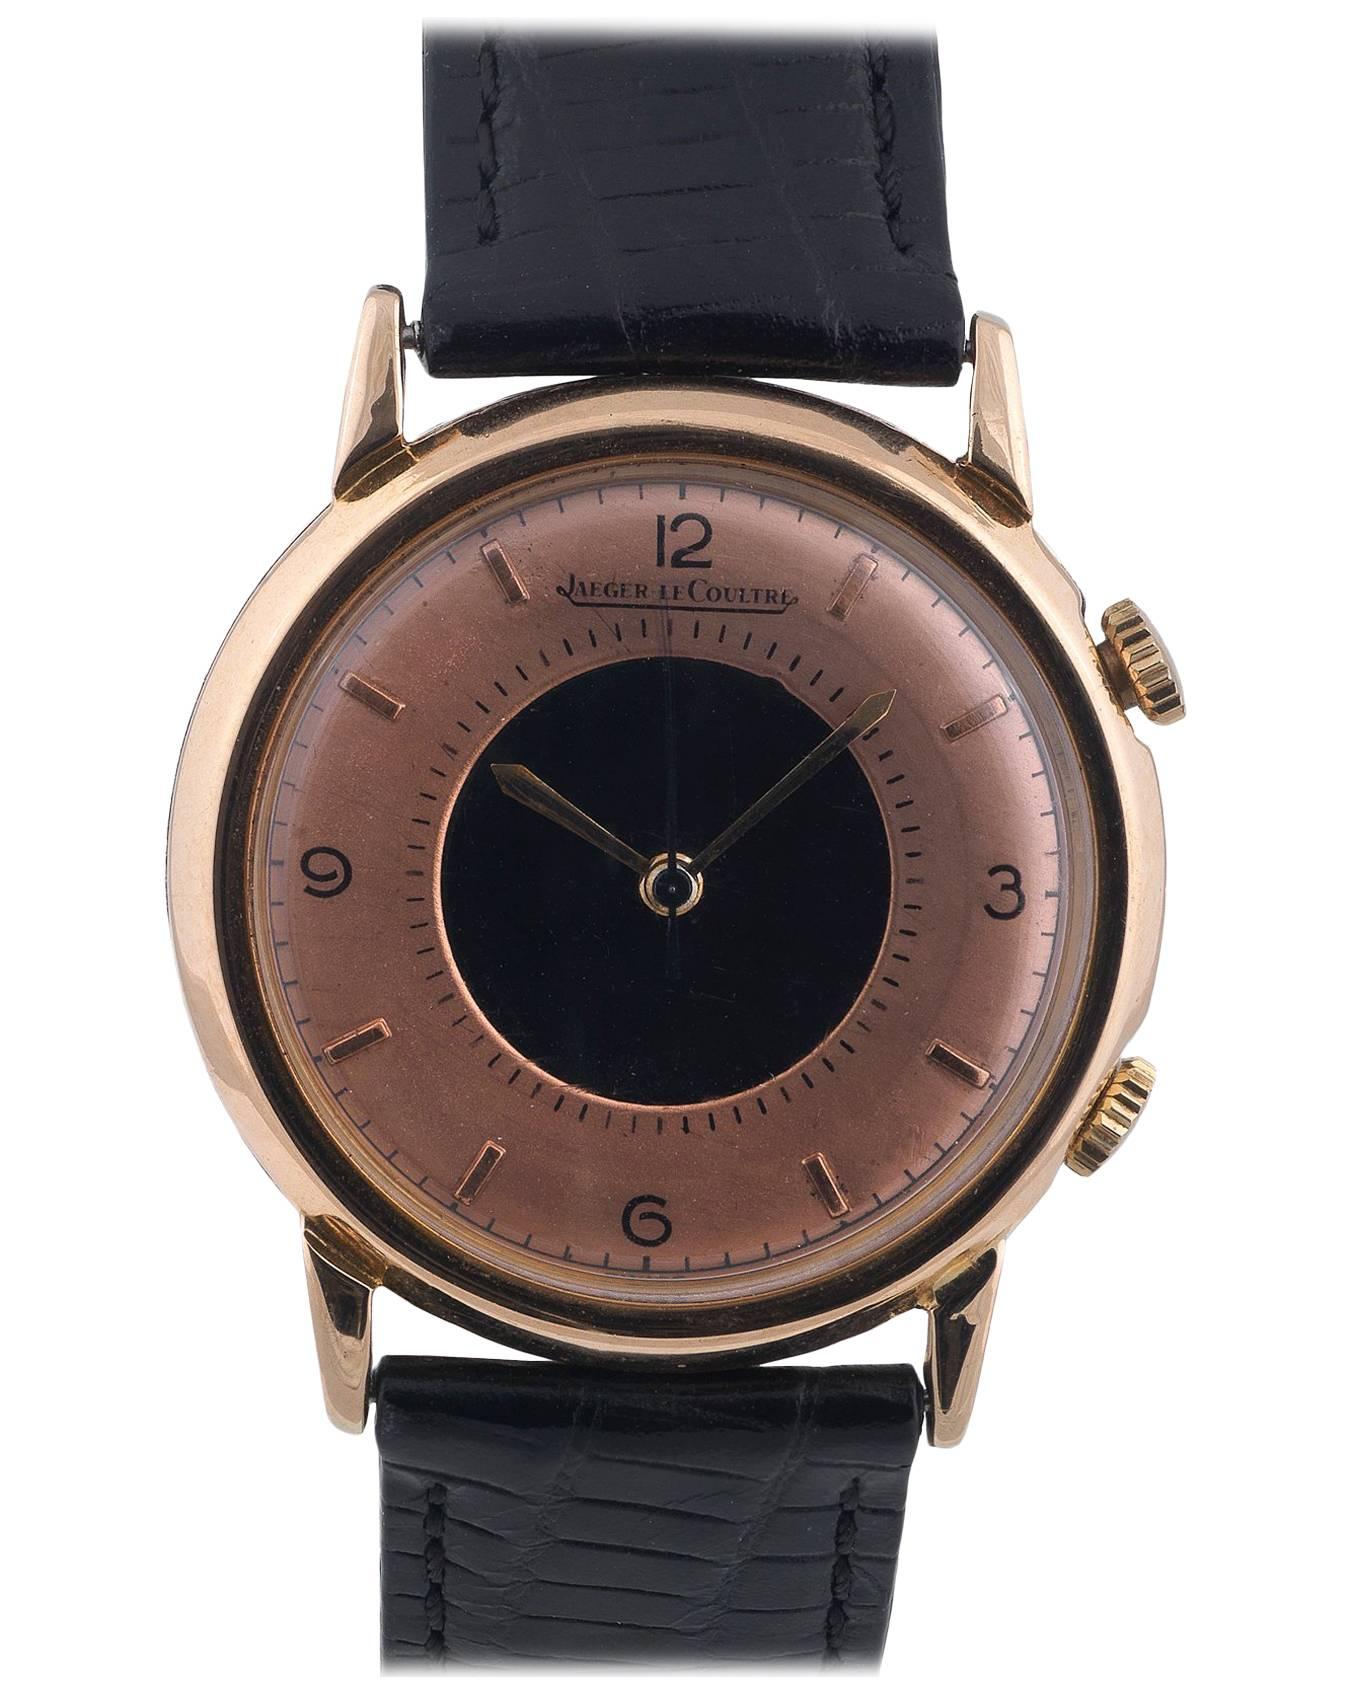 Jaeger-LeCoultre Gold Plated Memovox Manual Wind Alarm Wristwatch